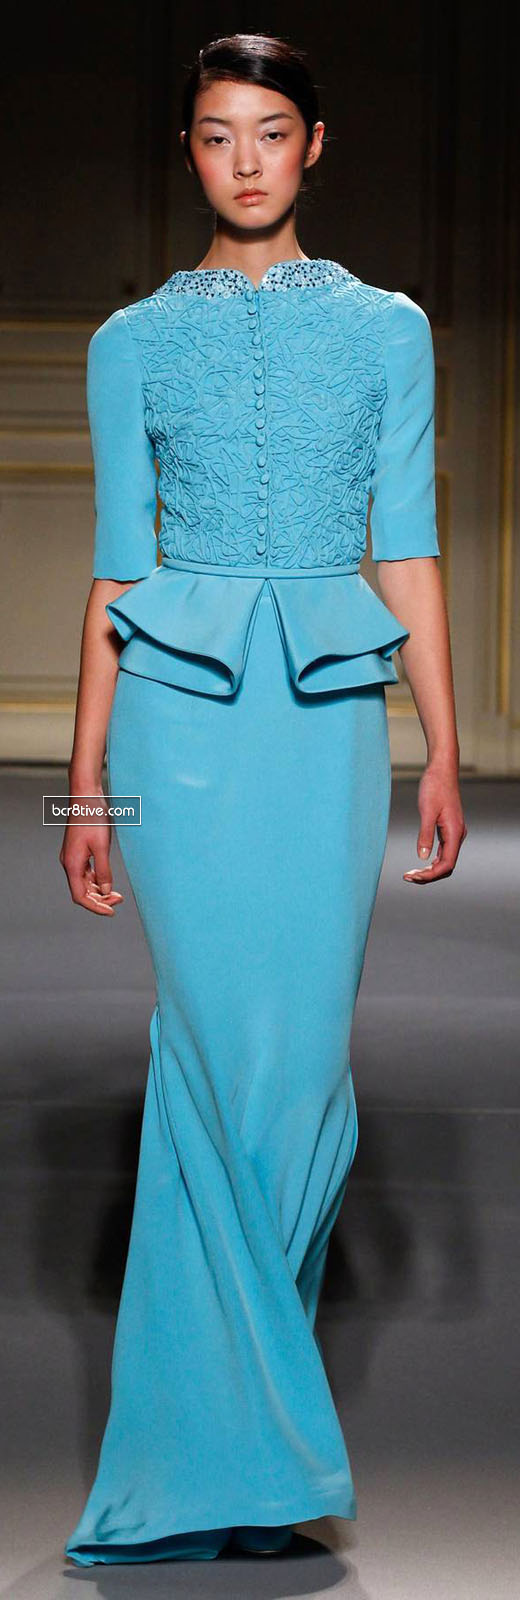 Georges Hobeika Couture Collection Spring 2013 – Be Creative